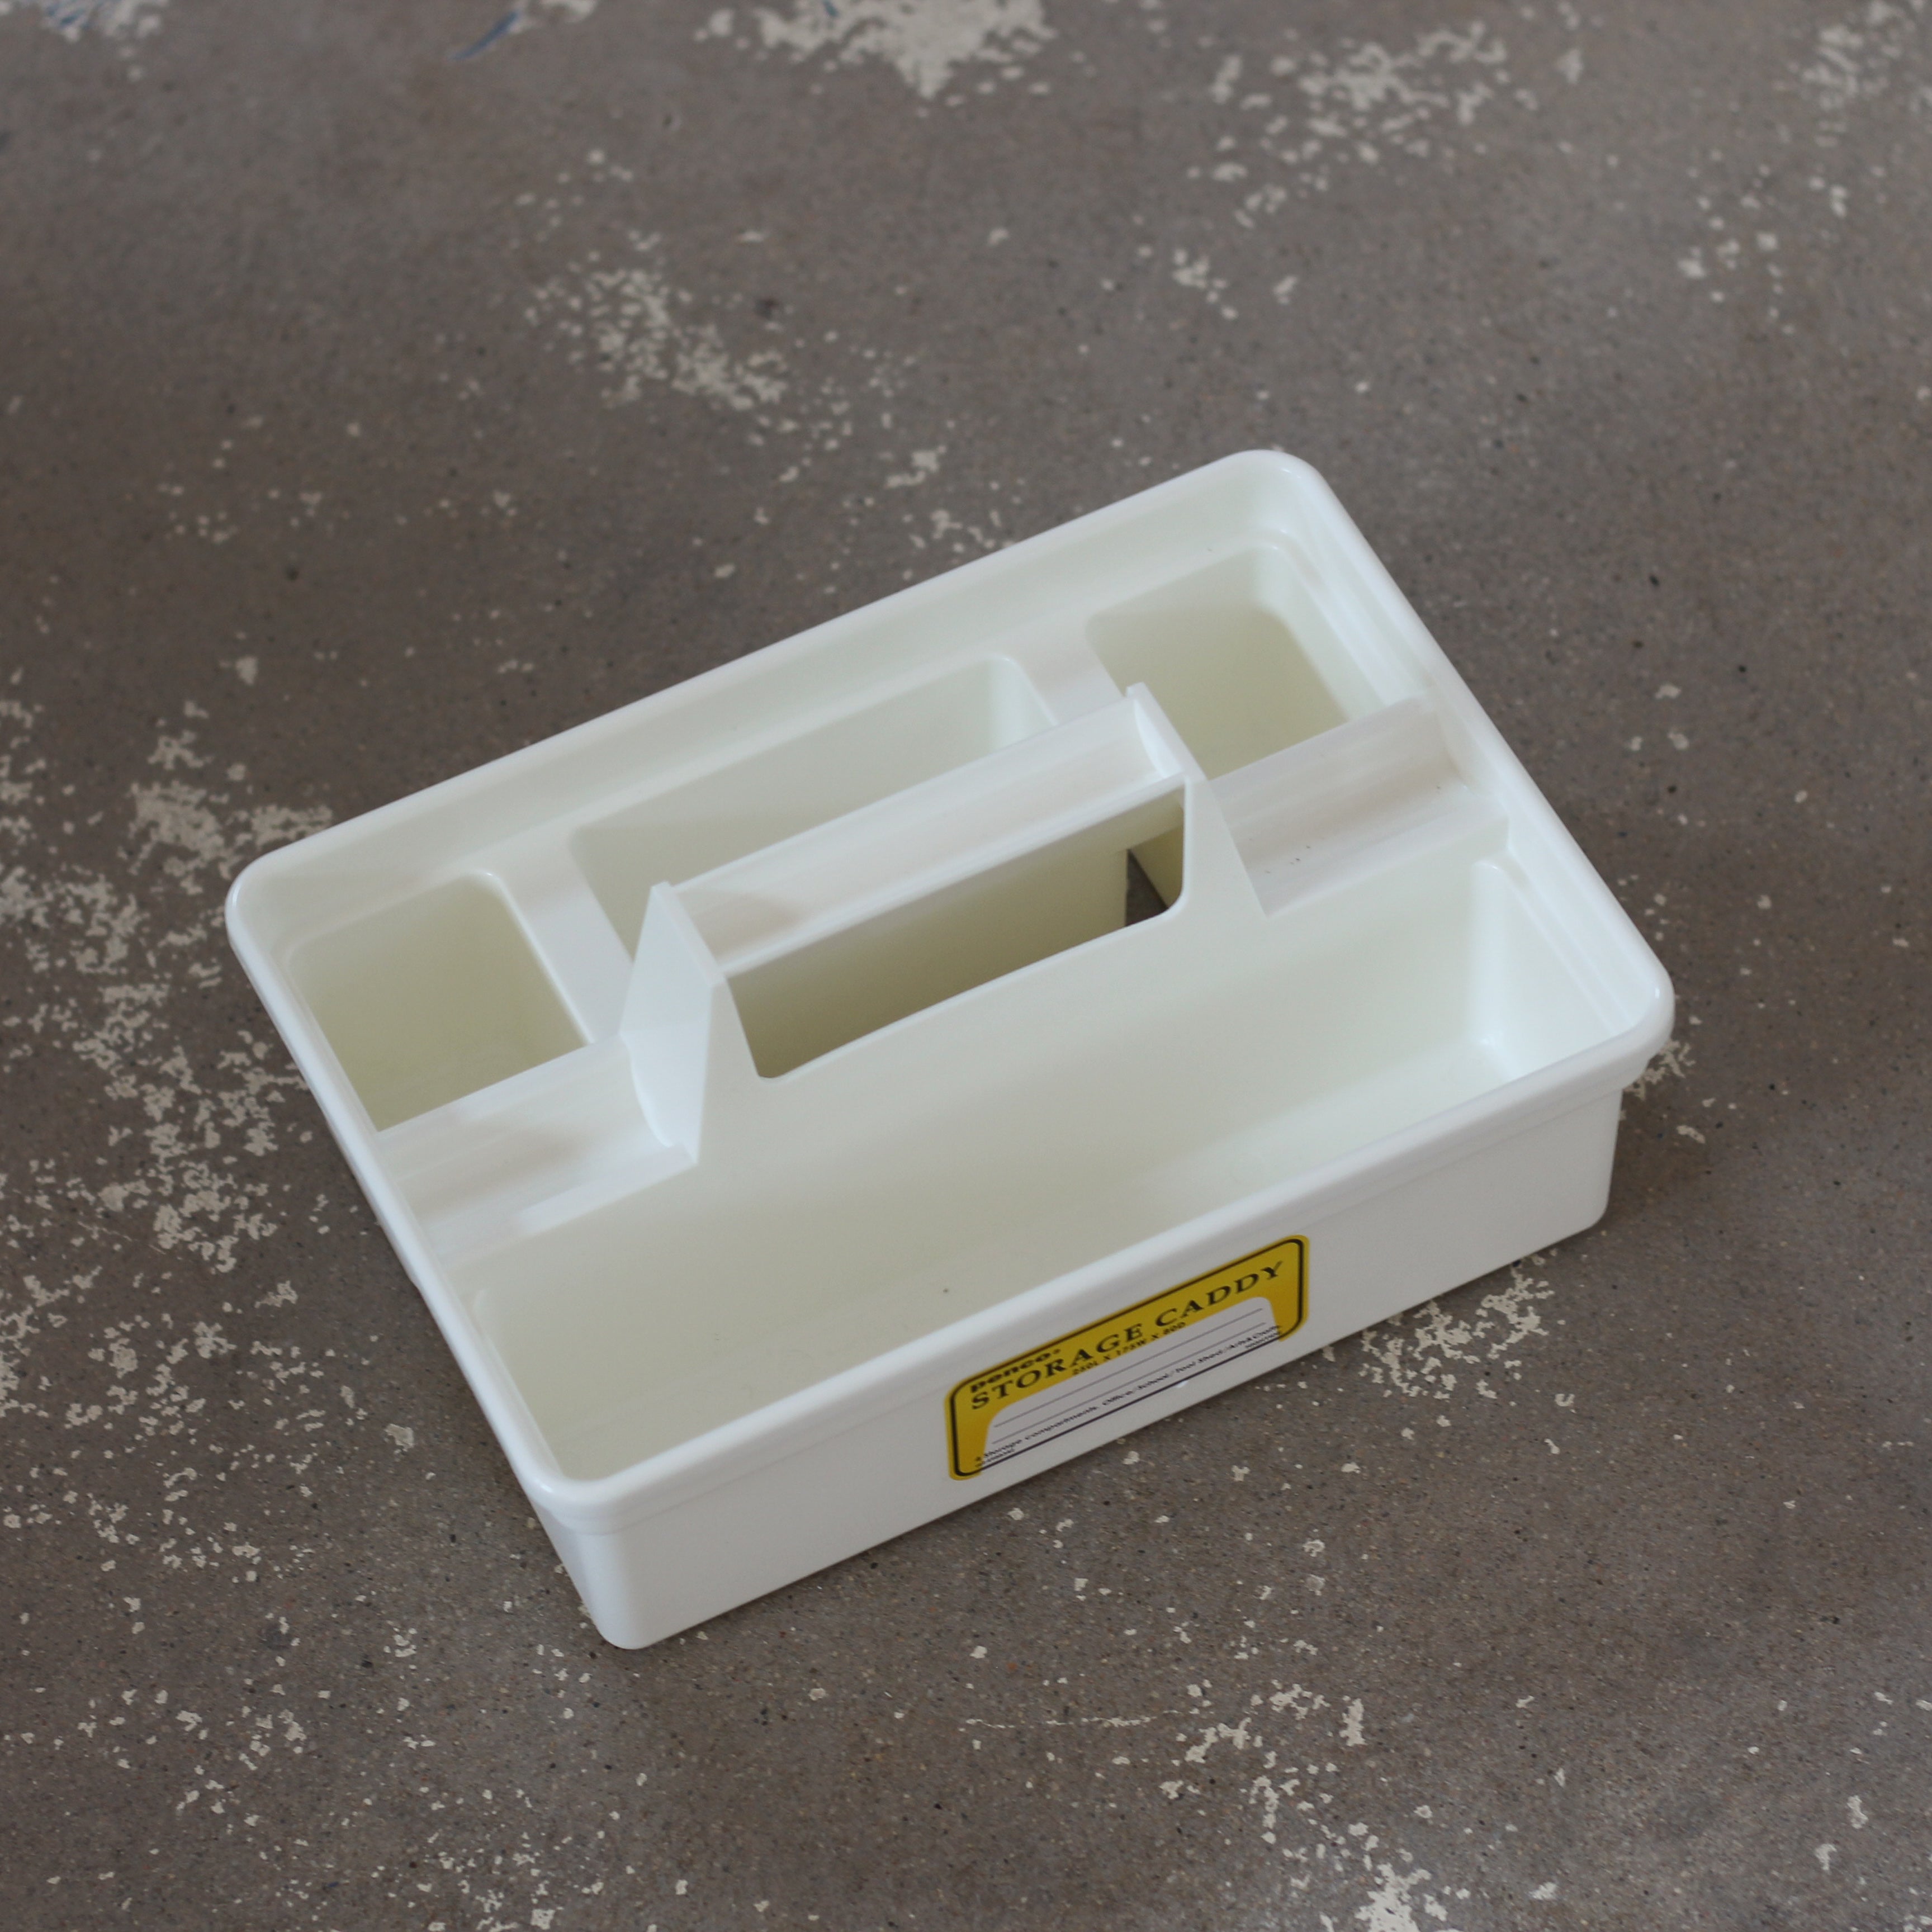 Penco Storage Caddy  The Container Store